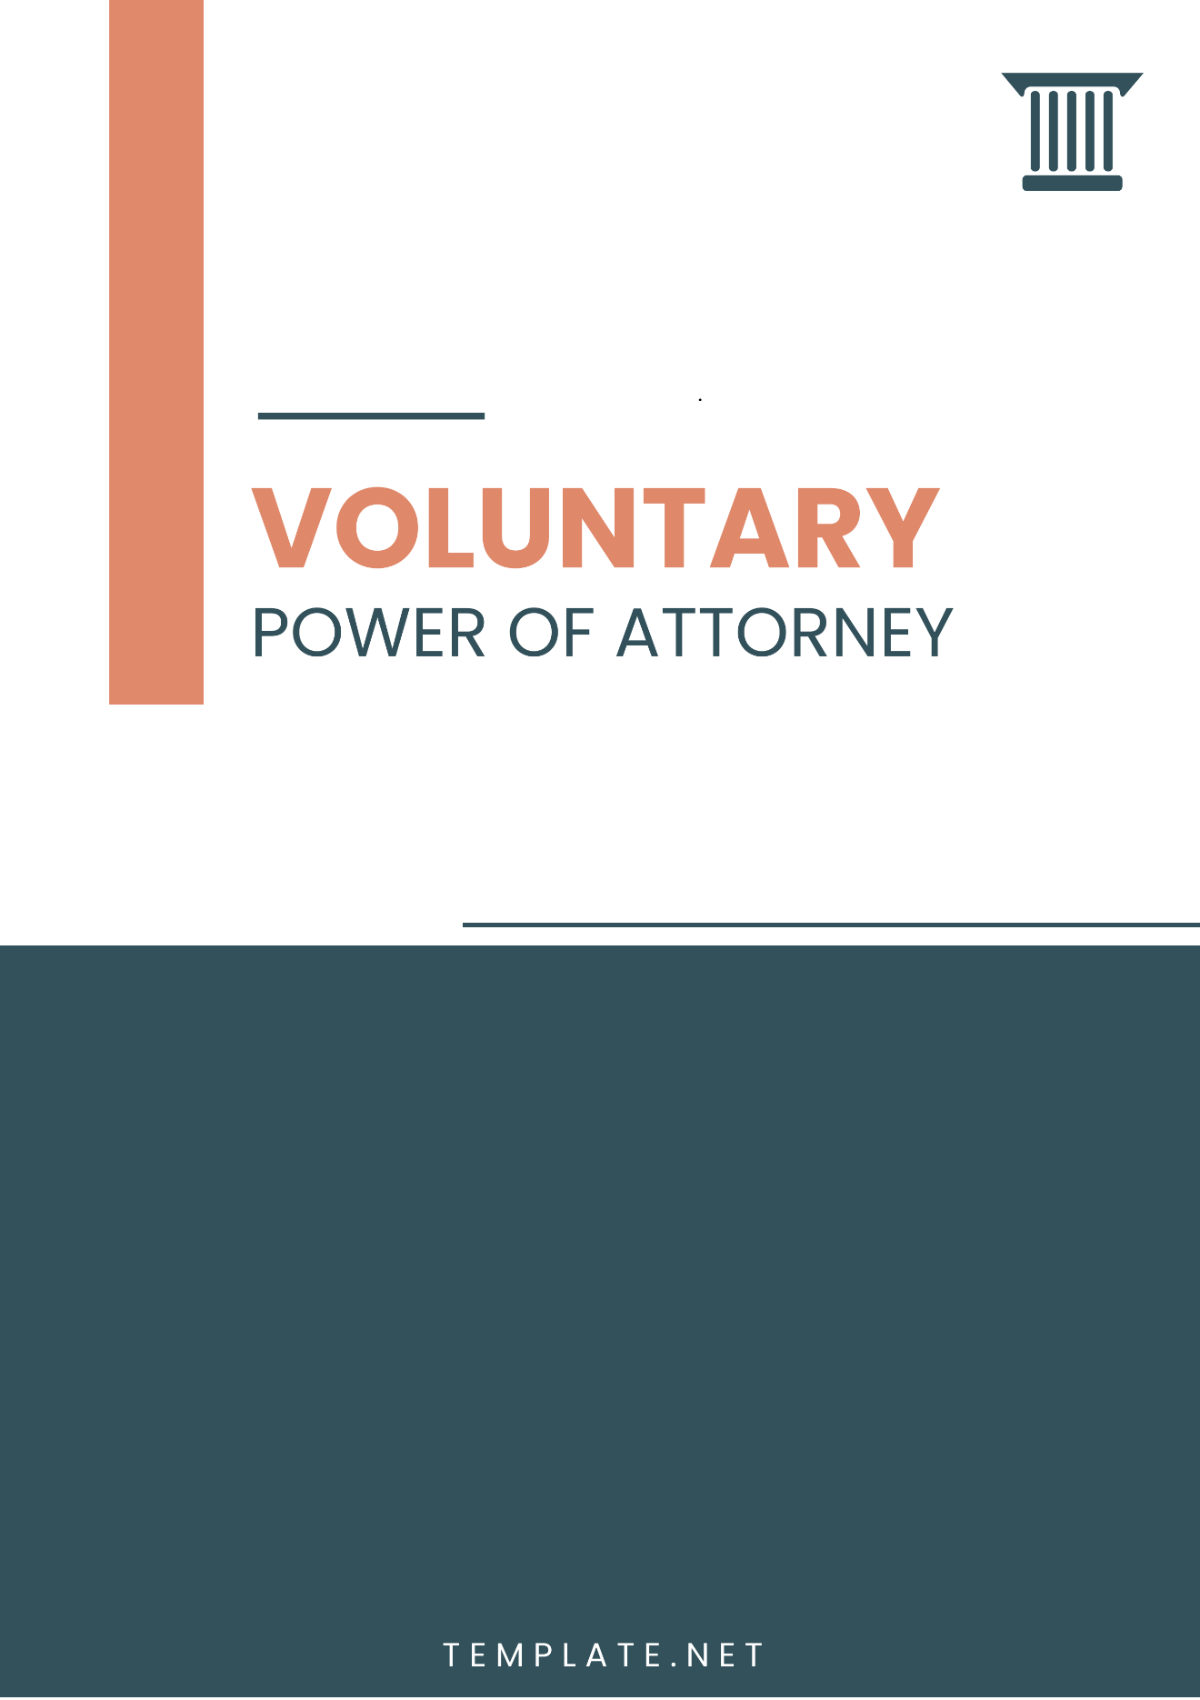 Voluntary Power of Attorney Template